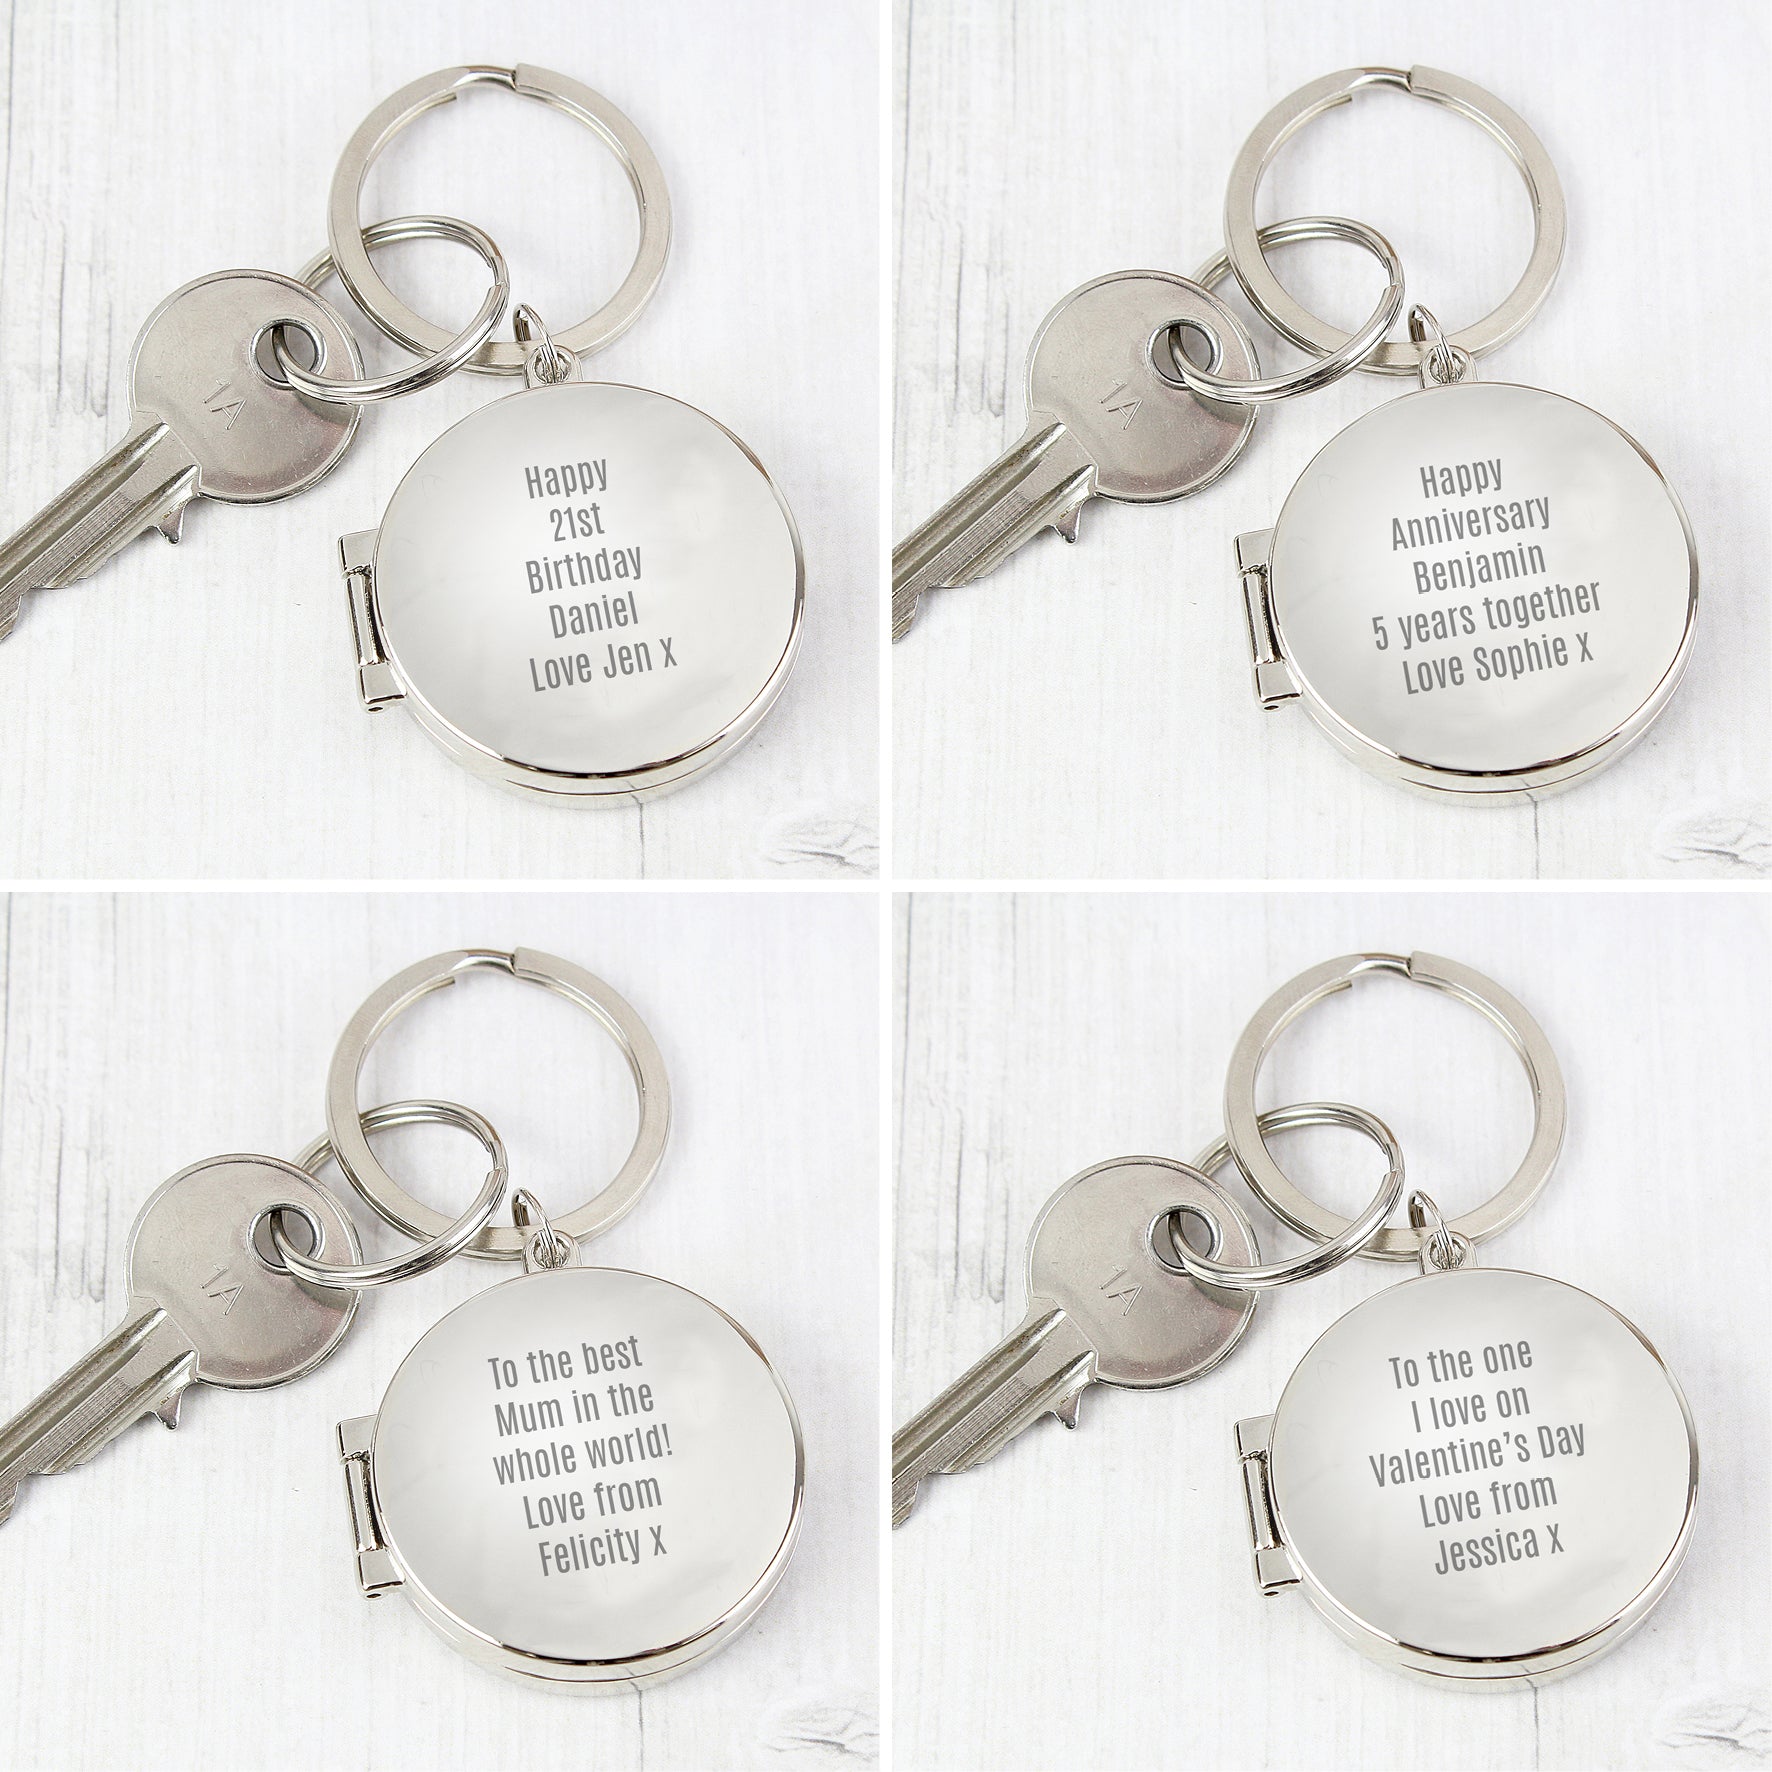 Various message ideas for engraved keyring